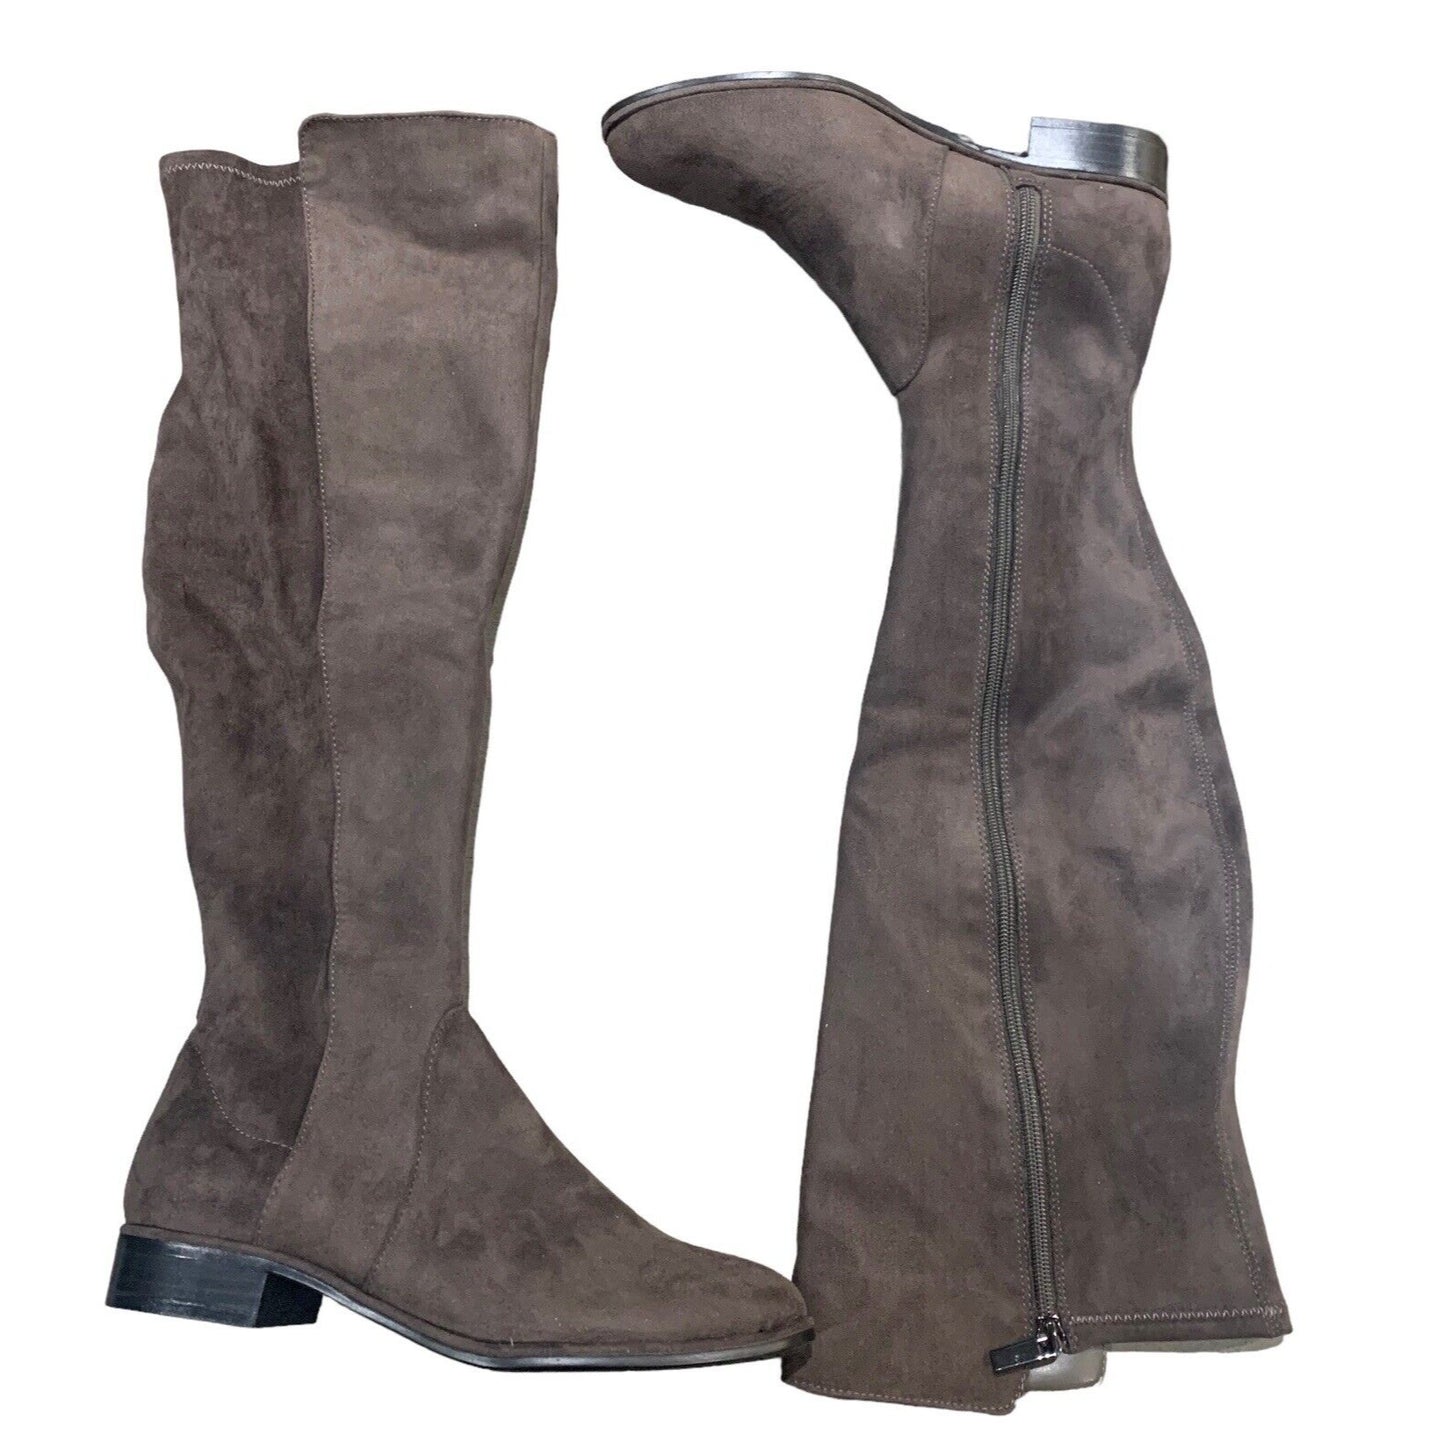 one knee high boot displayed right side up and one knee high boot displayed upside down